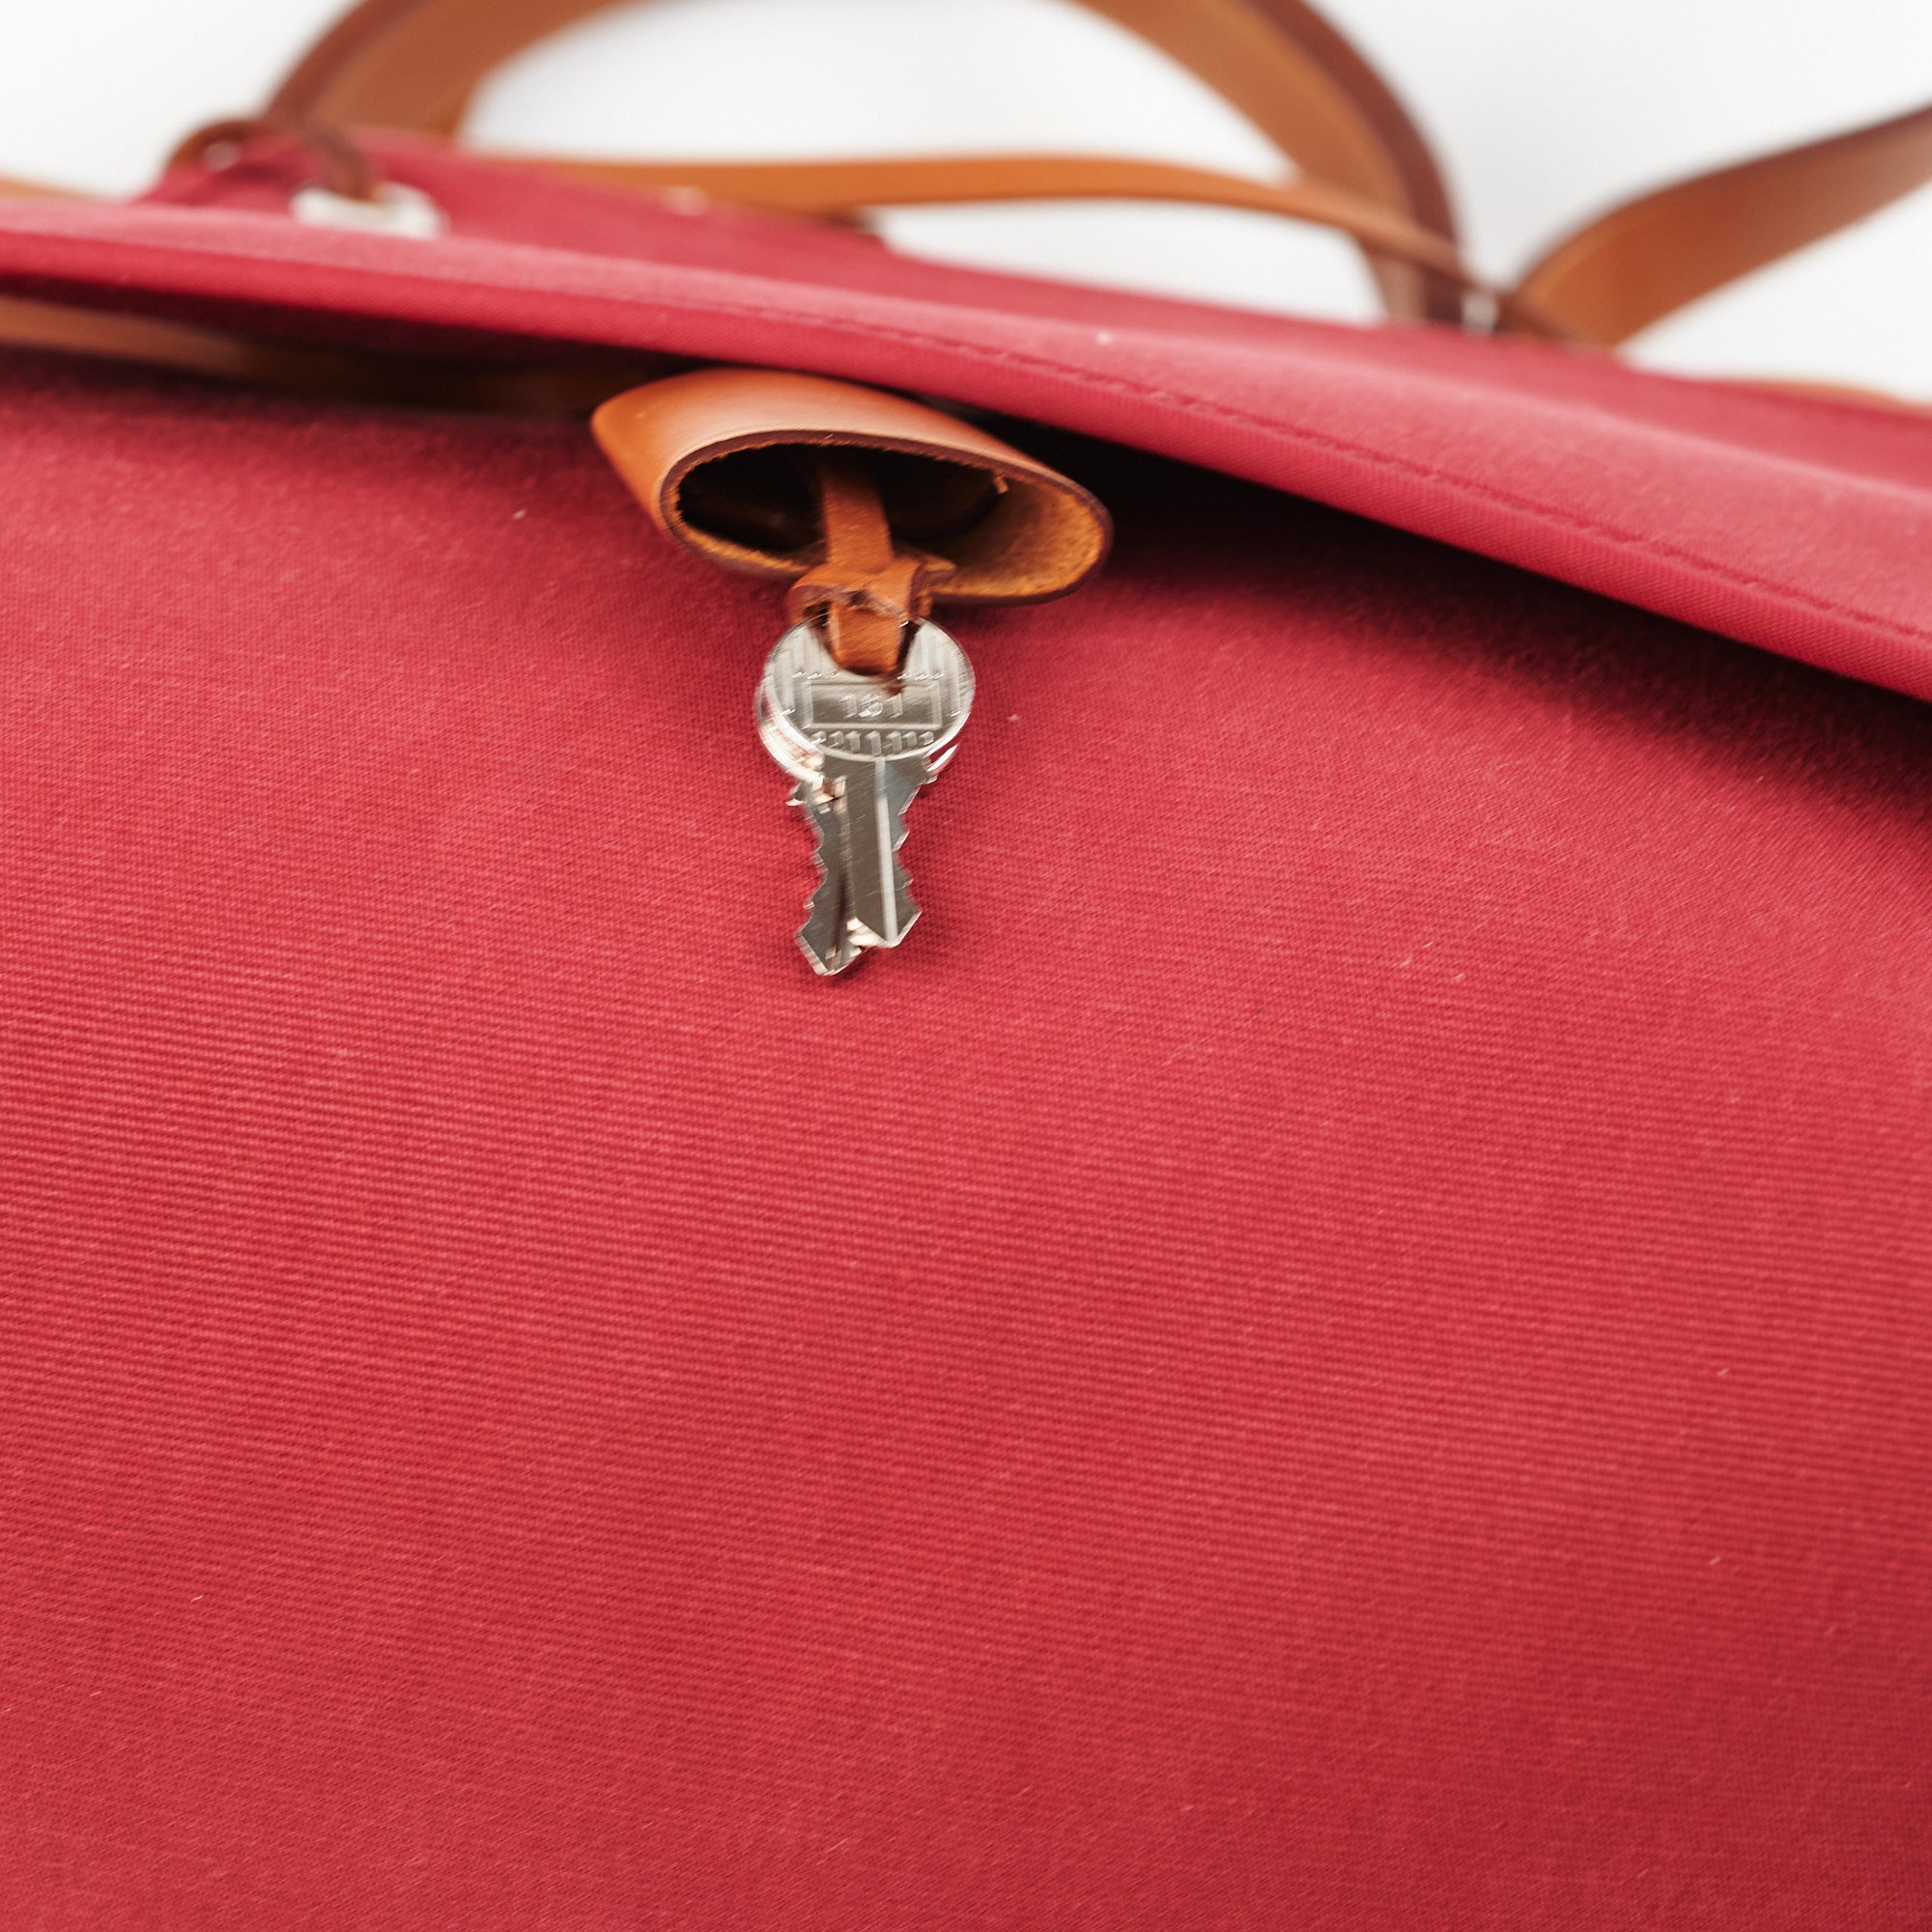 Hermes Herbag 31 Pink  Secondhand Hermes Bags - THE PURSE AFFAIR